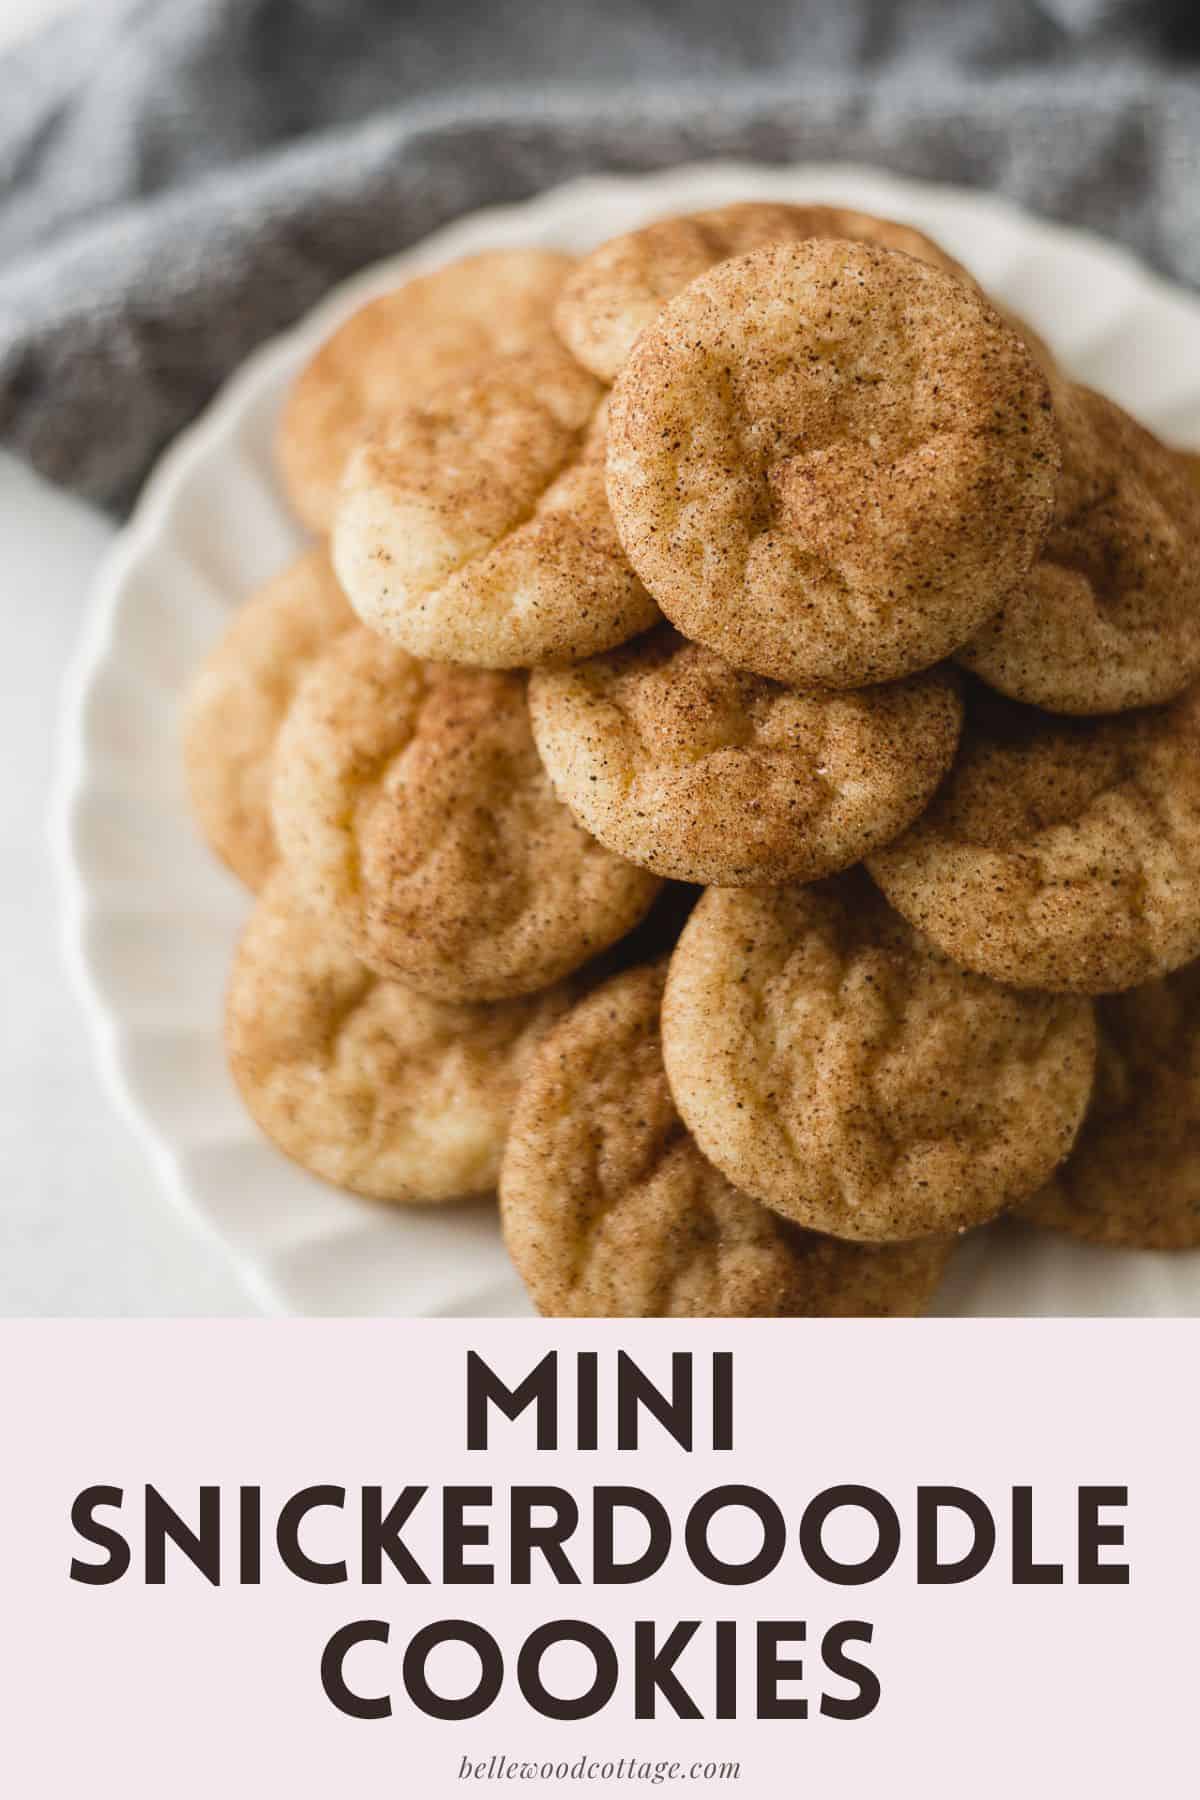 A stack of mini snickerdoodle cookies on a plate with the words, "Mini Snickerdoodle Cookies".